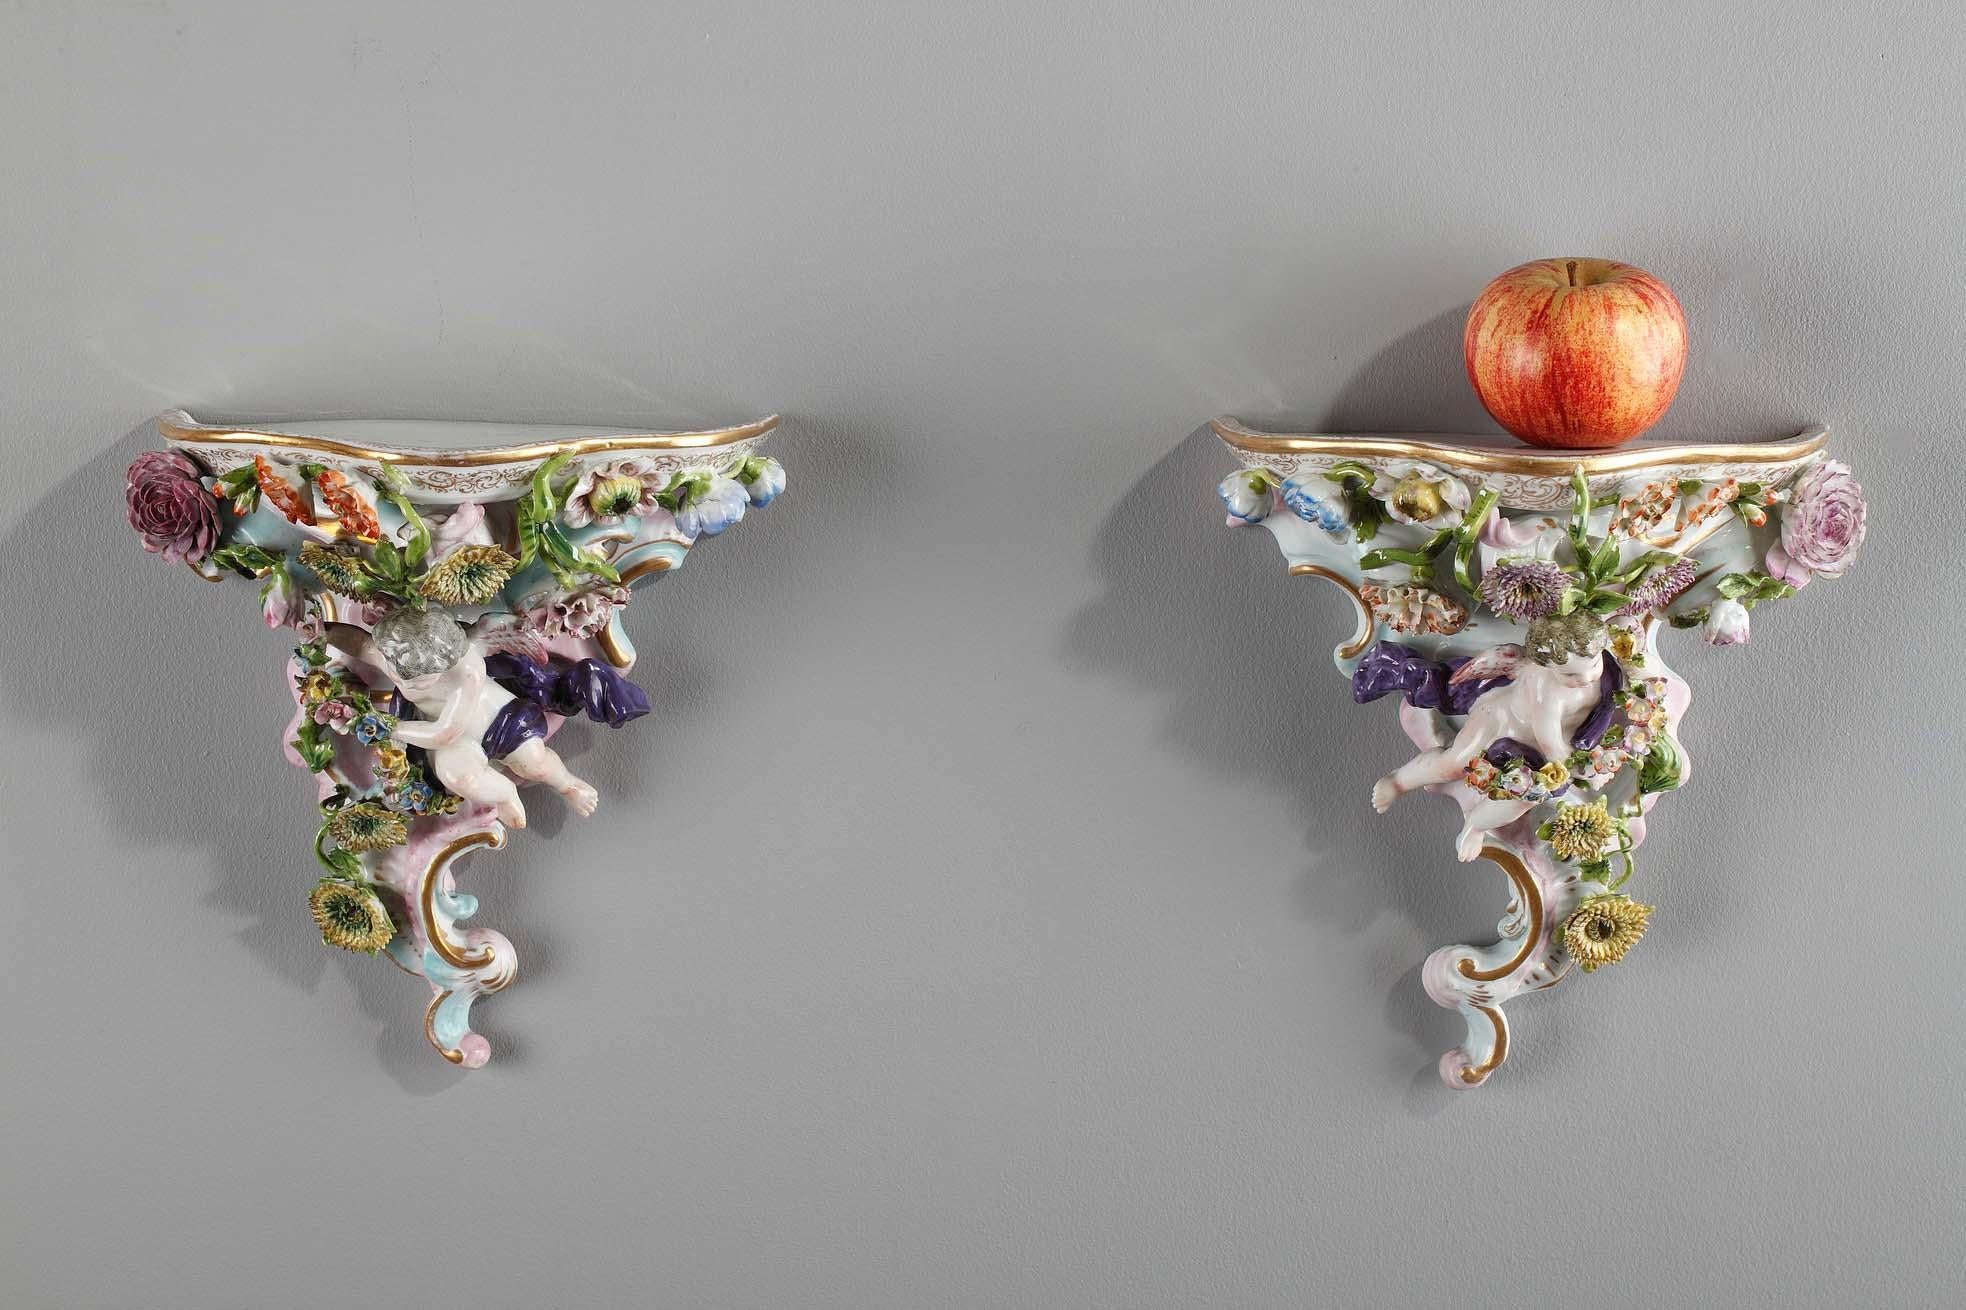 Pair of Small Rococo Wall Consoles in the Style of Meissen Manufacture 12